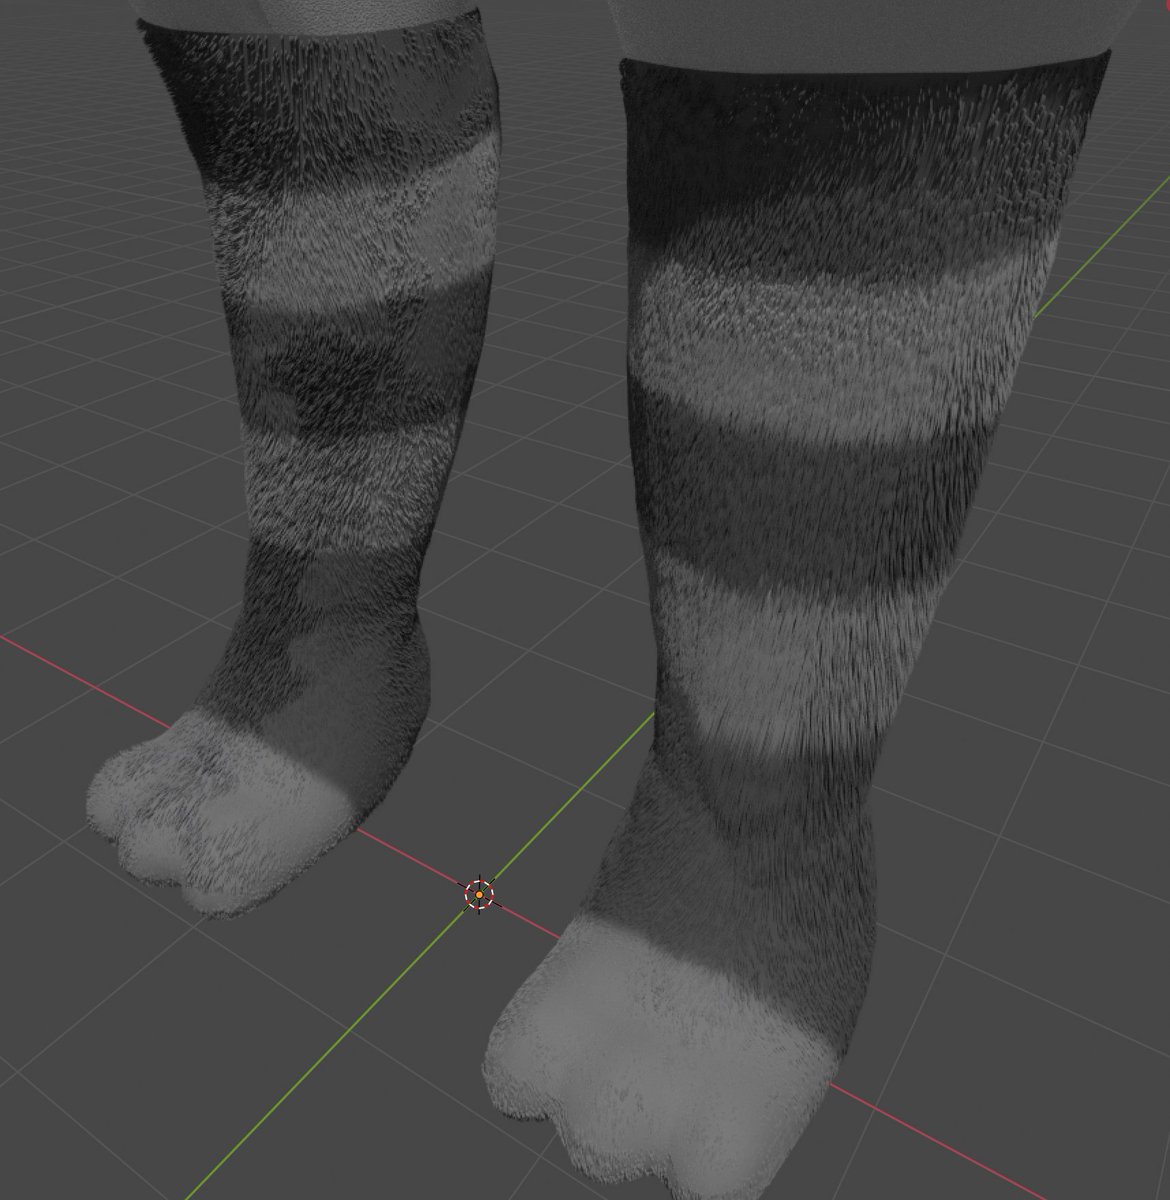 Hey though the legs are looking pretty nice. Need to comb a bit more, but I'm pretty happy with this as-is